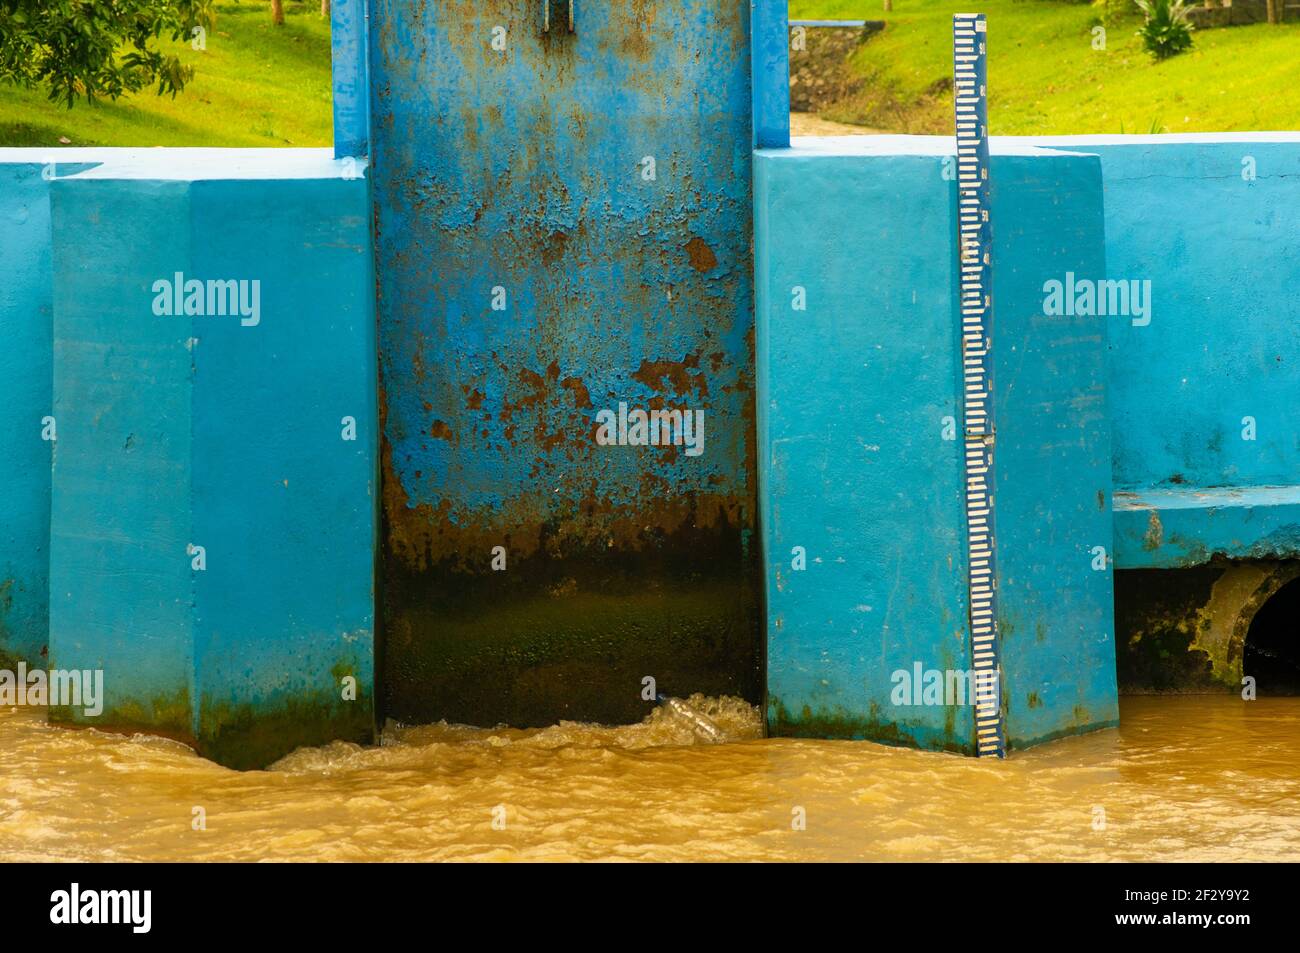 Dams in the river to regulate water flow and prevent flooding in rainy season Stock Photo